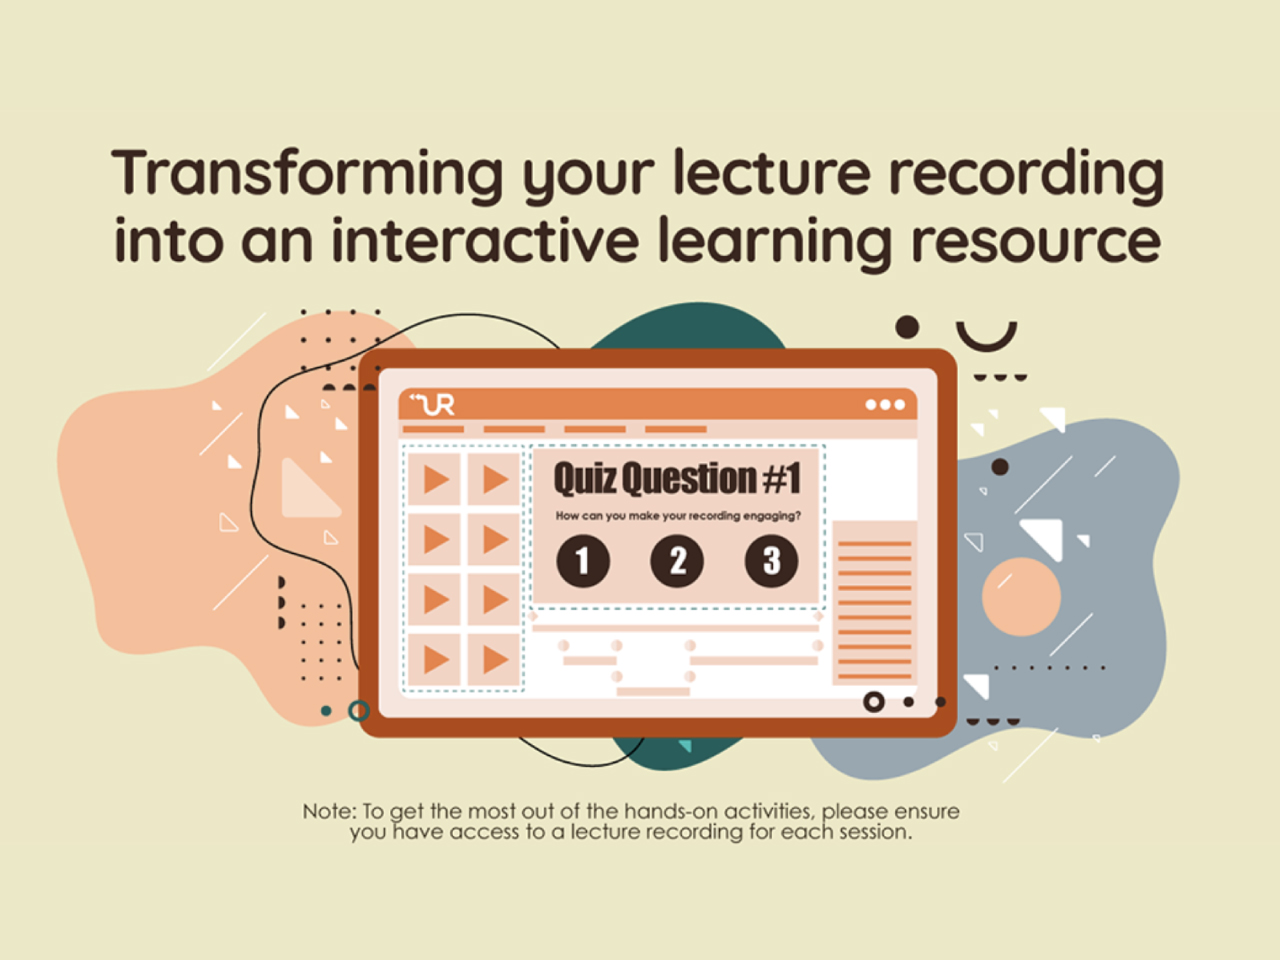 Workshop: Transforming your lecture recording into an interactive learning resource (Part I)